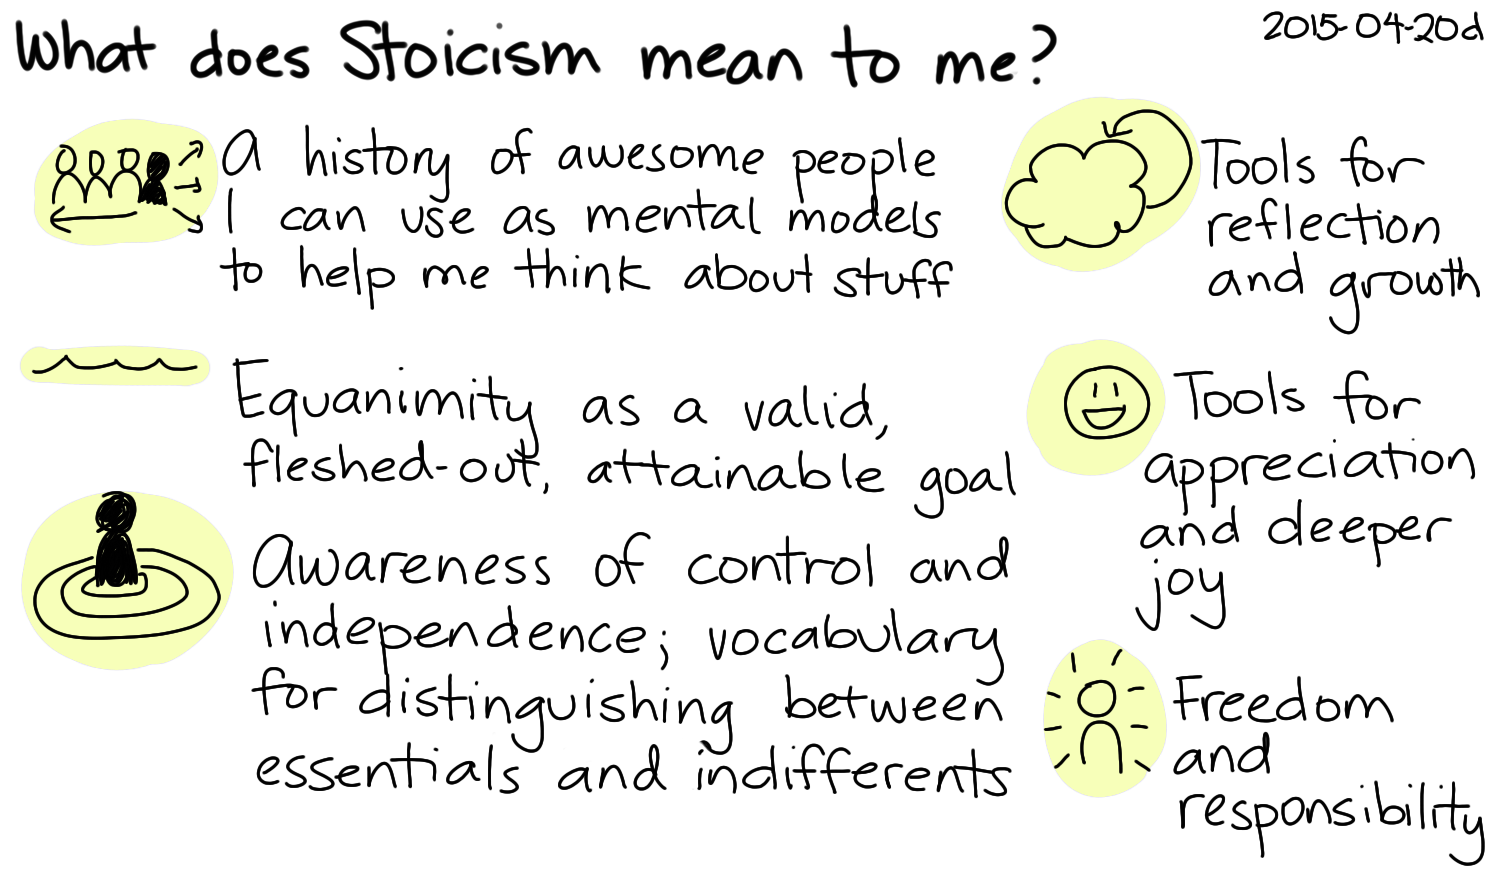 2015-04-20d What does Stoicism mean to me -- index card #stoicism.png